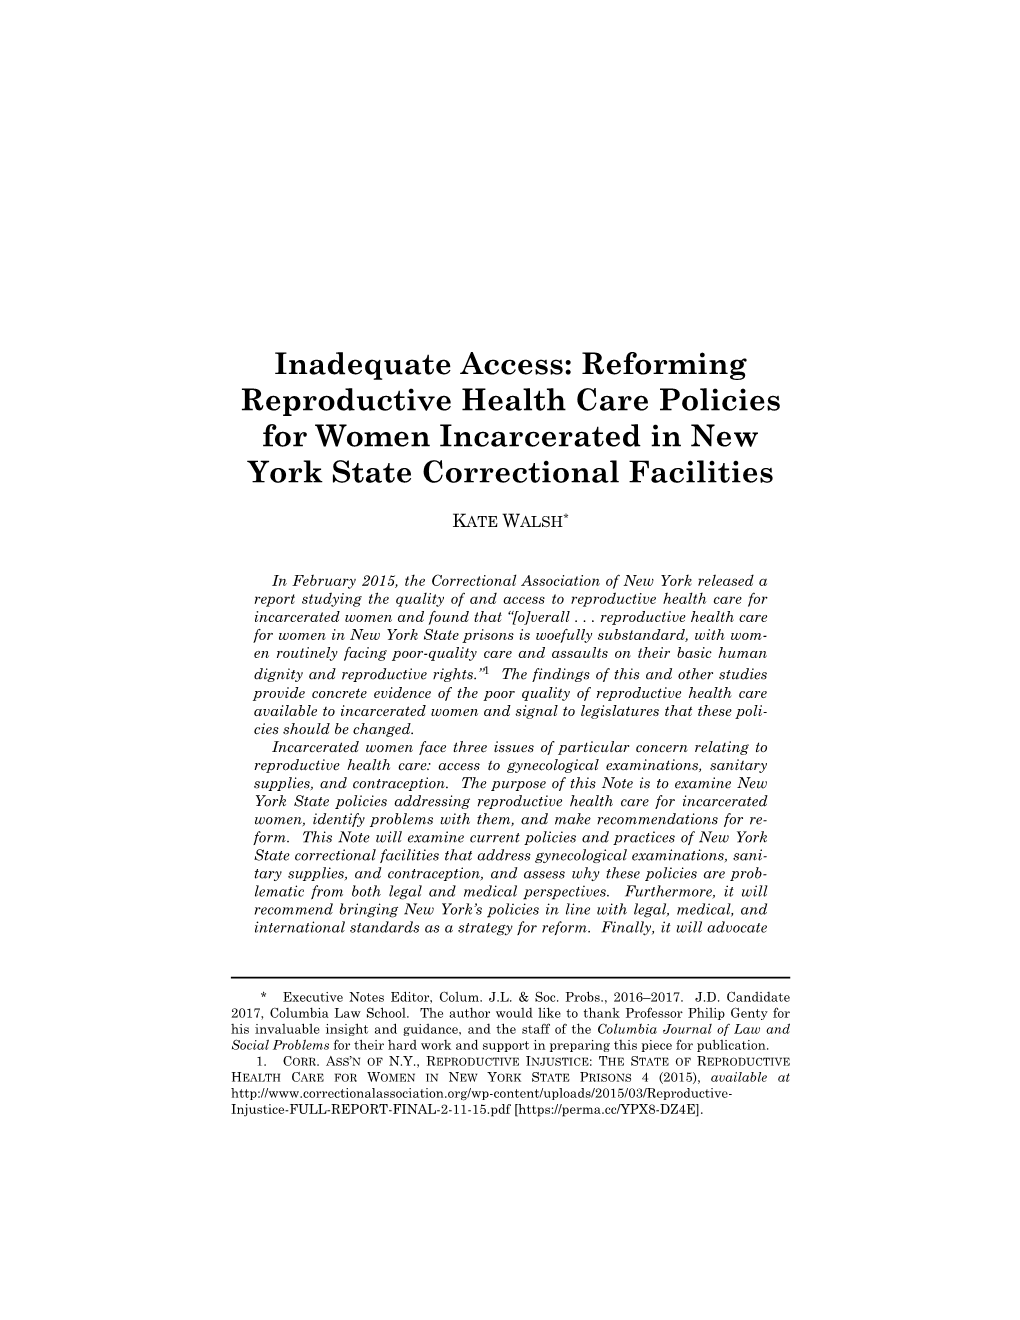 Reforming Reproductive Health Care Policies for Women Incarcerated in New York State Correctional Facilities